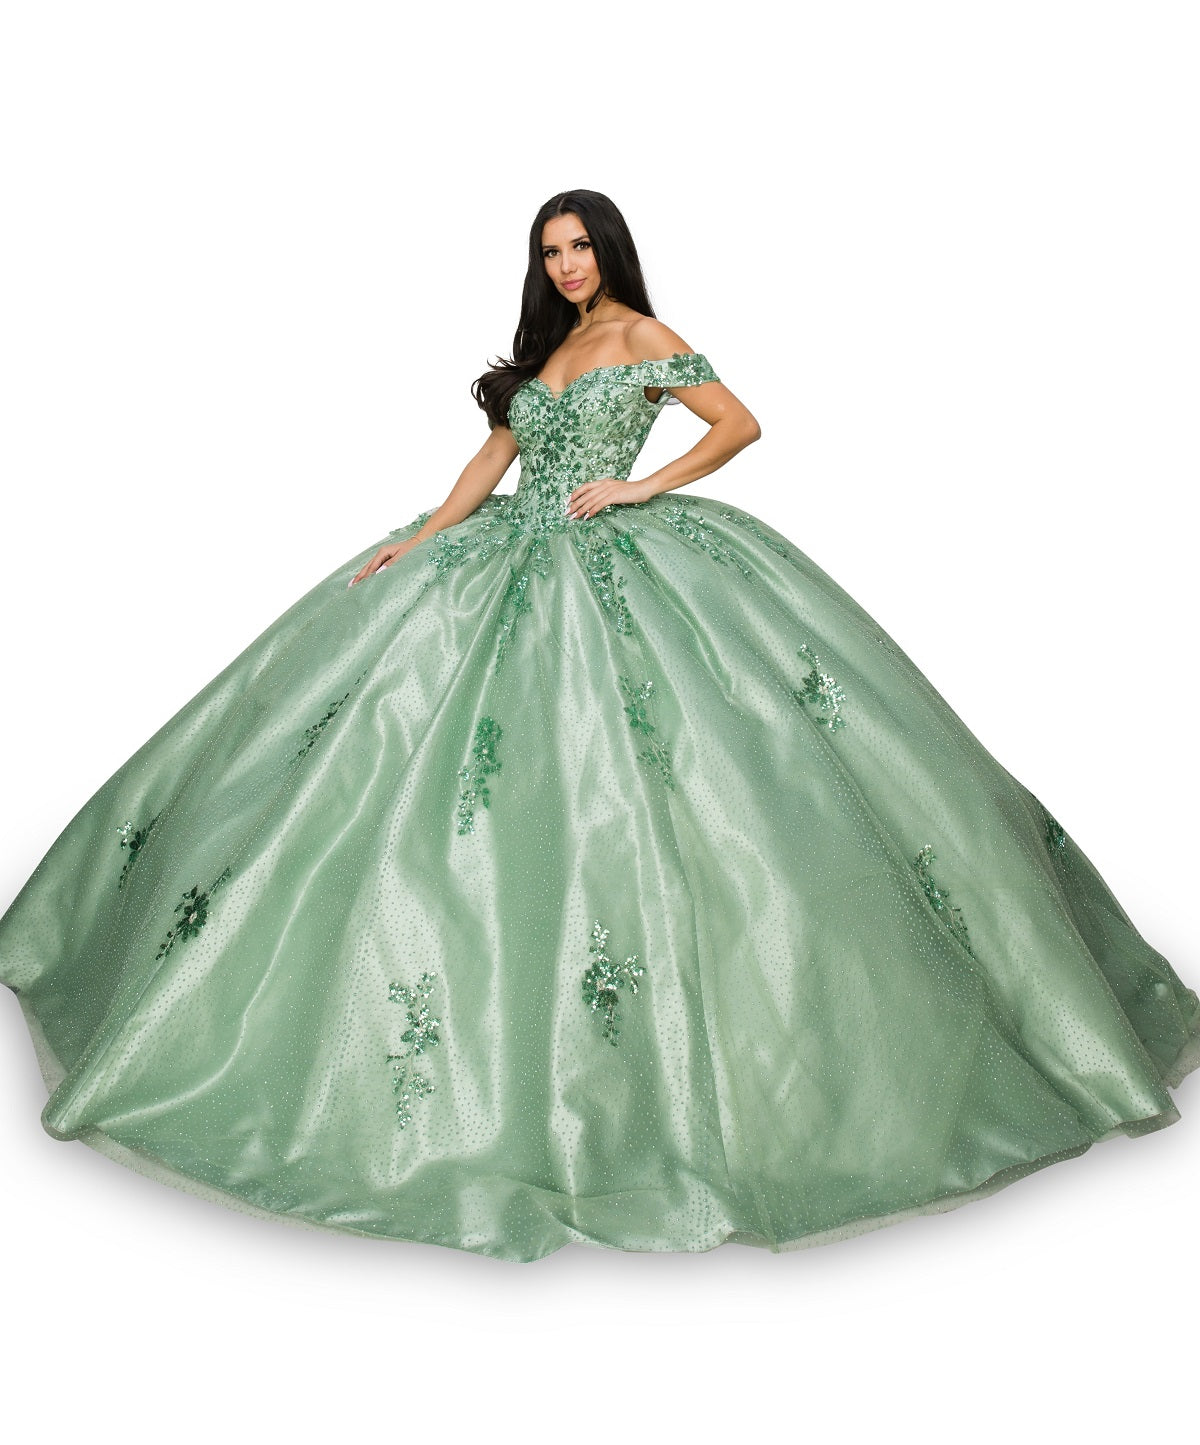 Elegant Lace Off Shoulder Sweetheart Embossed Tulle Satin Quinceanera Dress CU8060J Elsy Style Quinceanera